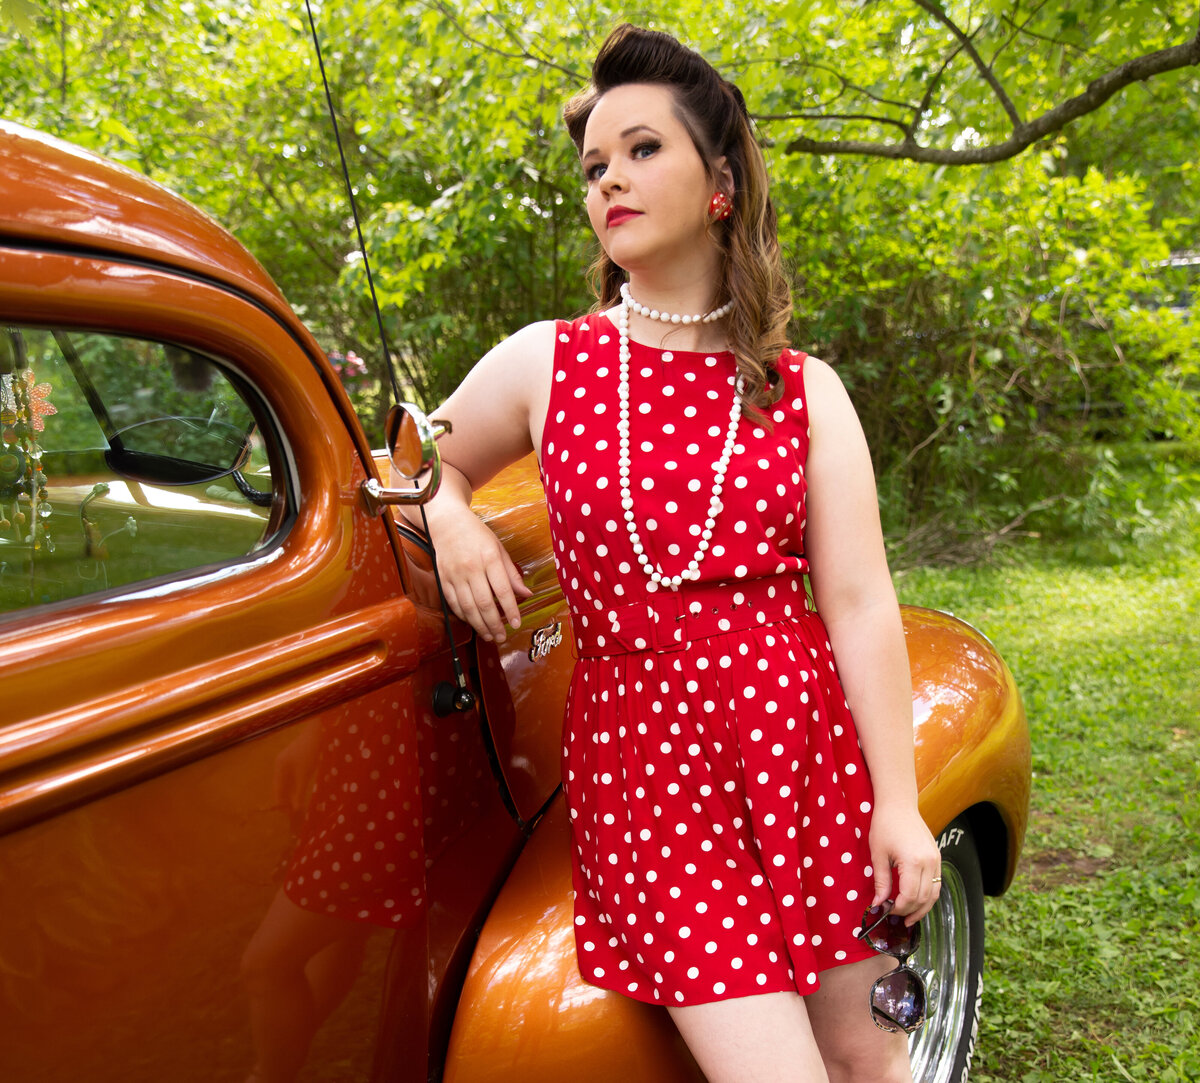 goddess studio boudoir woman red with white polka dots white beads leaning on old ford pickup sunglasses in hand